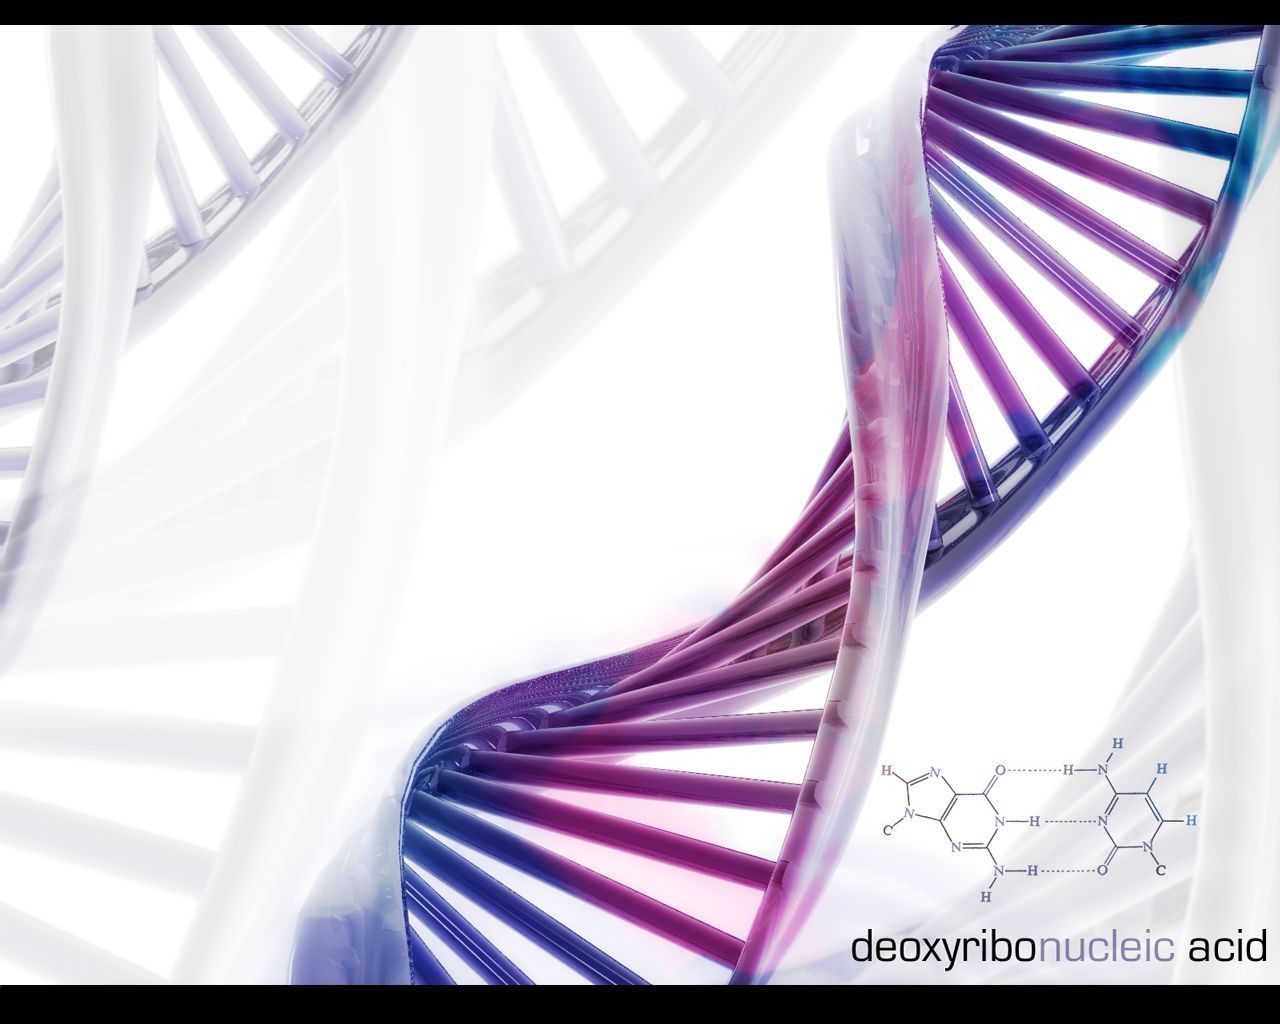 Download Dna Science Free Wallpaper 1280x1024 Full HD Backgrounds